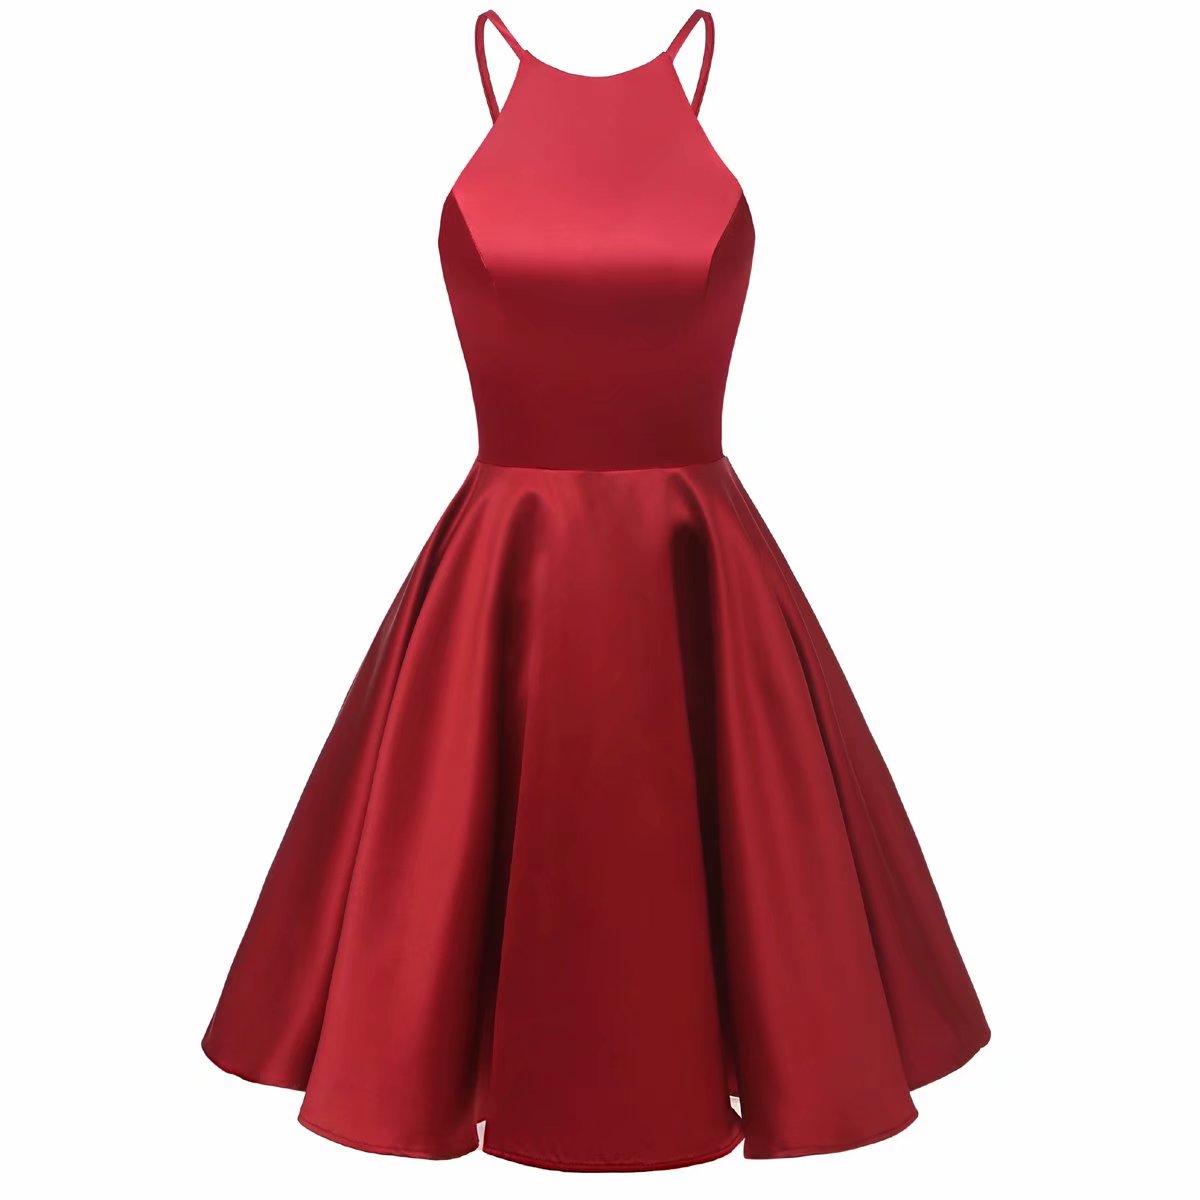 2019 Short Burgundy Homecoming Dresses Prom Party Evening Cocktail Gown Bridesmaid Dresses